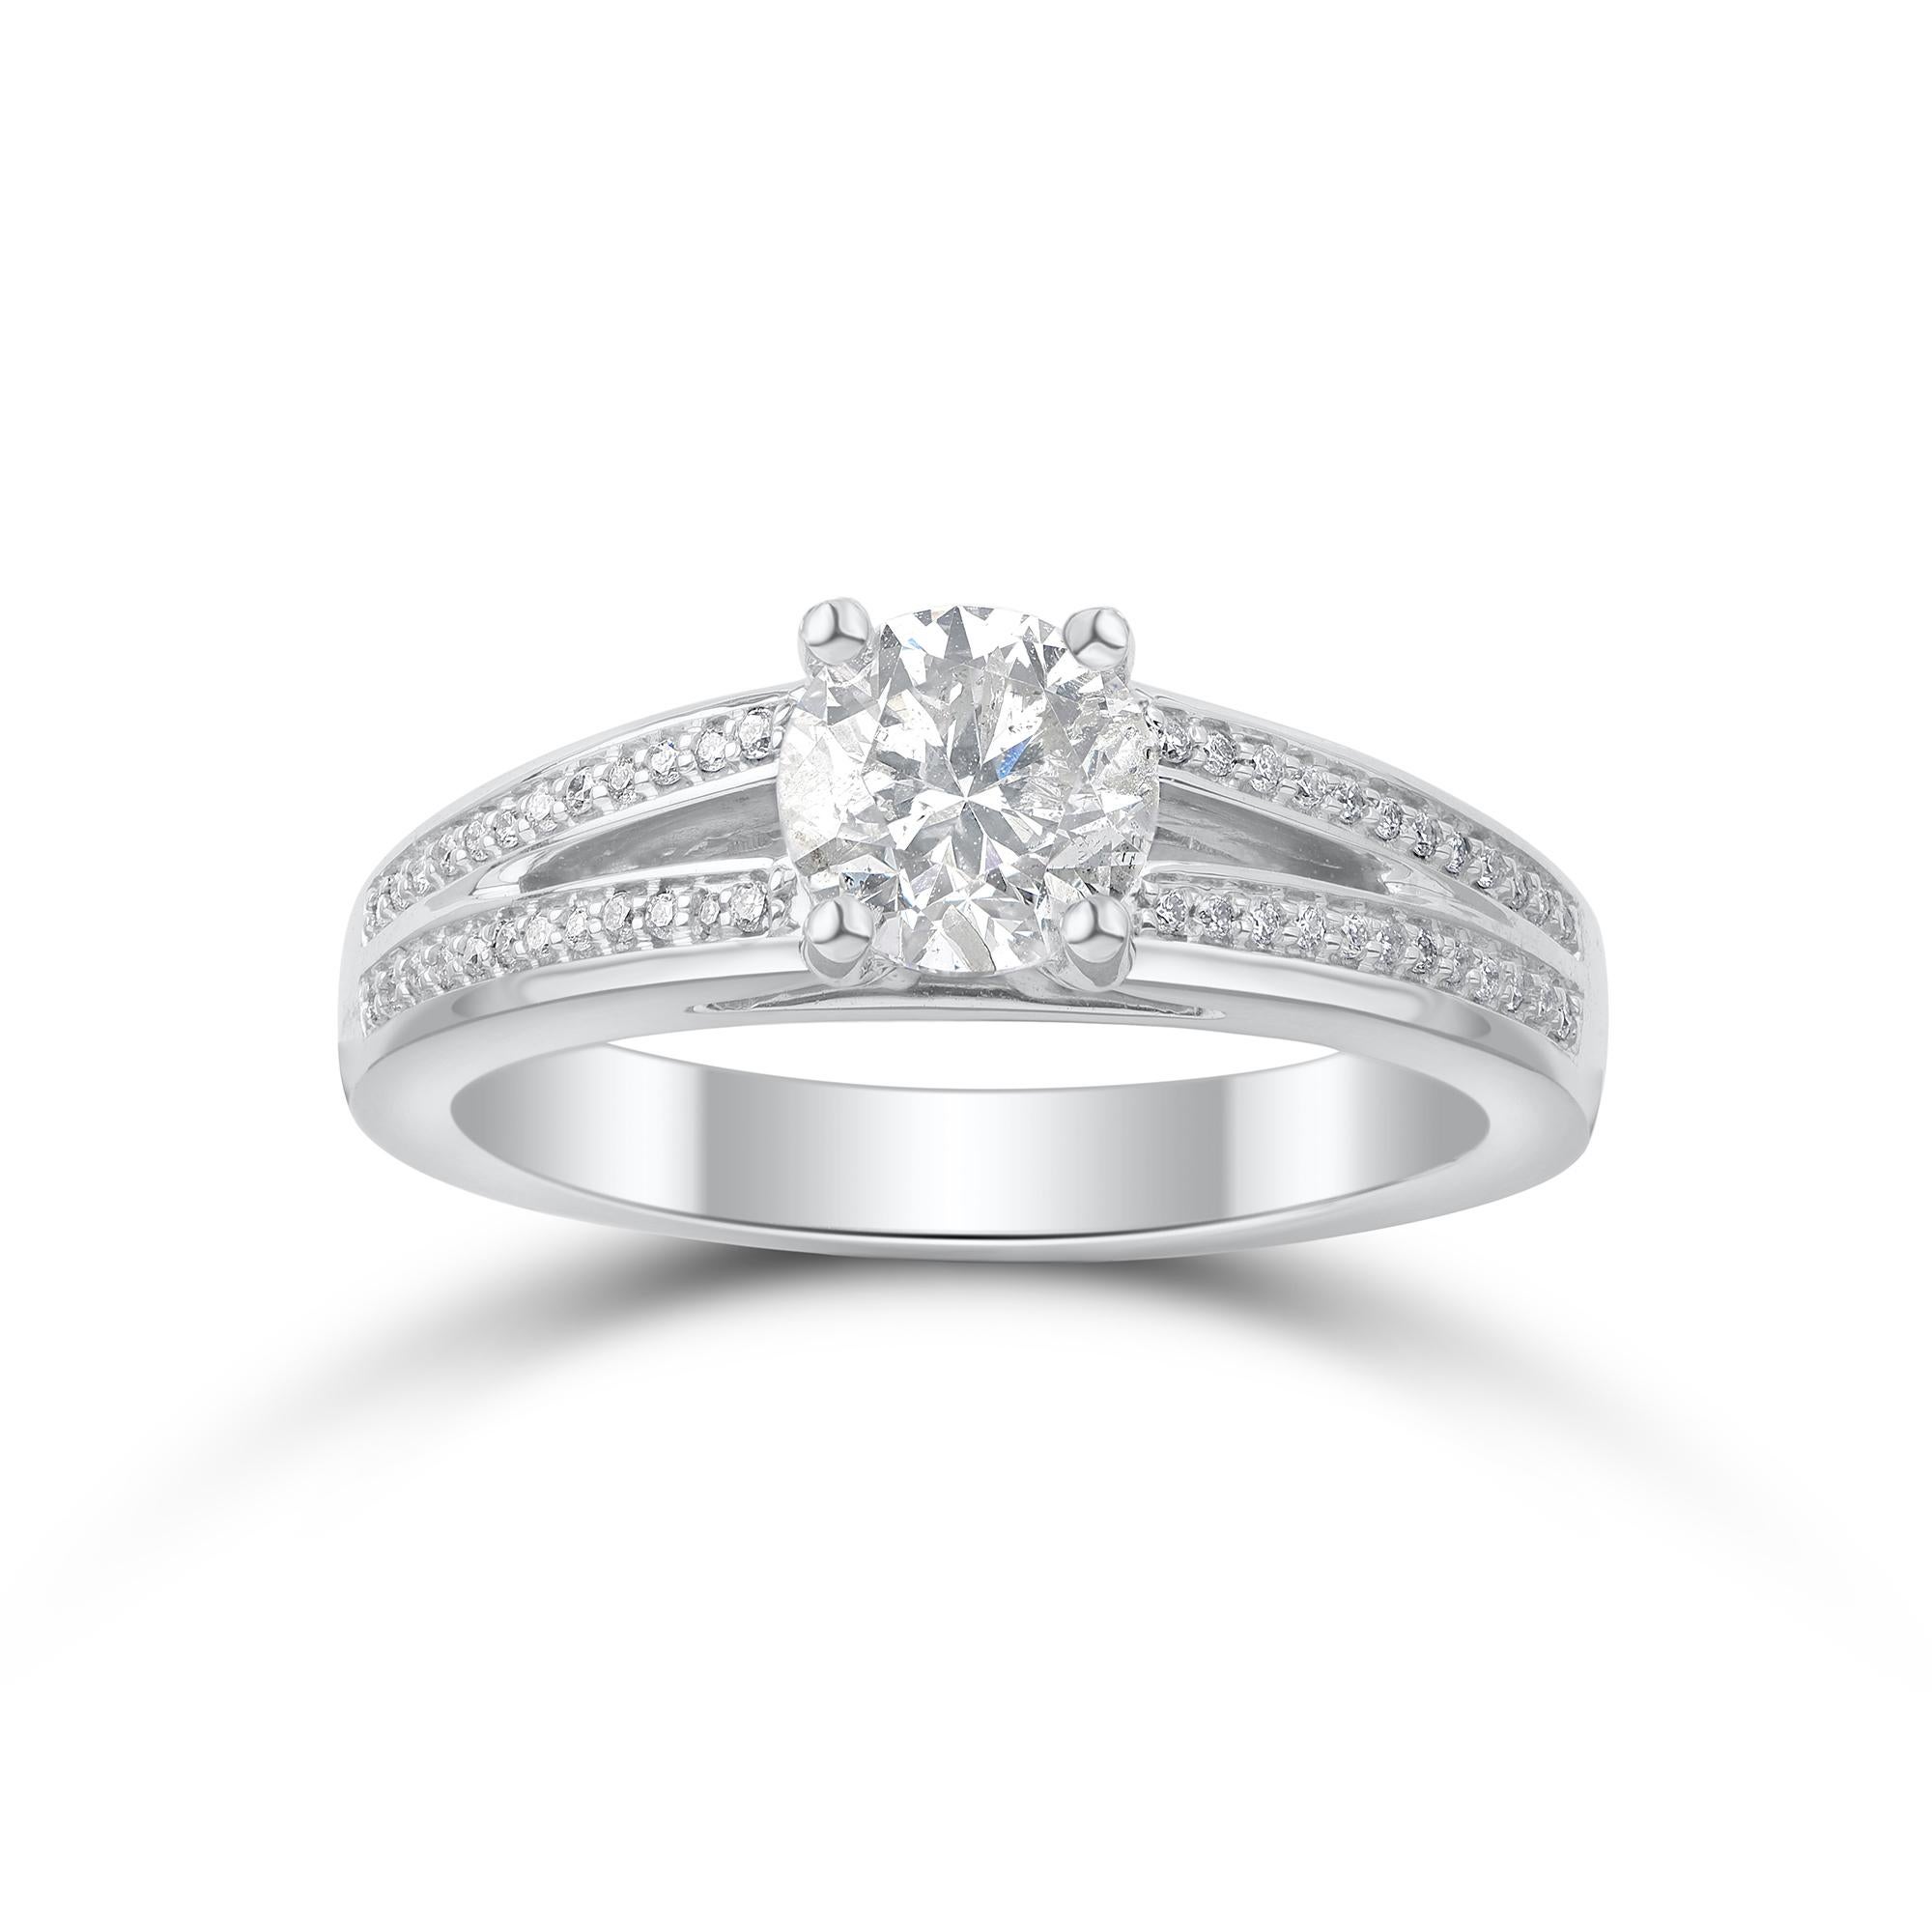 Beautiful white gold ring laced with diamonds is expertly handcrafted in 18 kt white gold and accentuated with 49 natural round diamond set in prong and pave setting. Diamonds are graded J-K Color, I3 Clarity. Ring is US size 7 and can be resized on